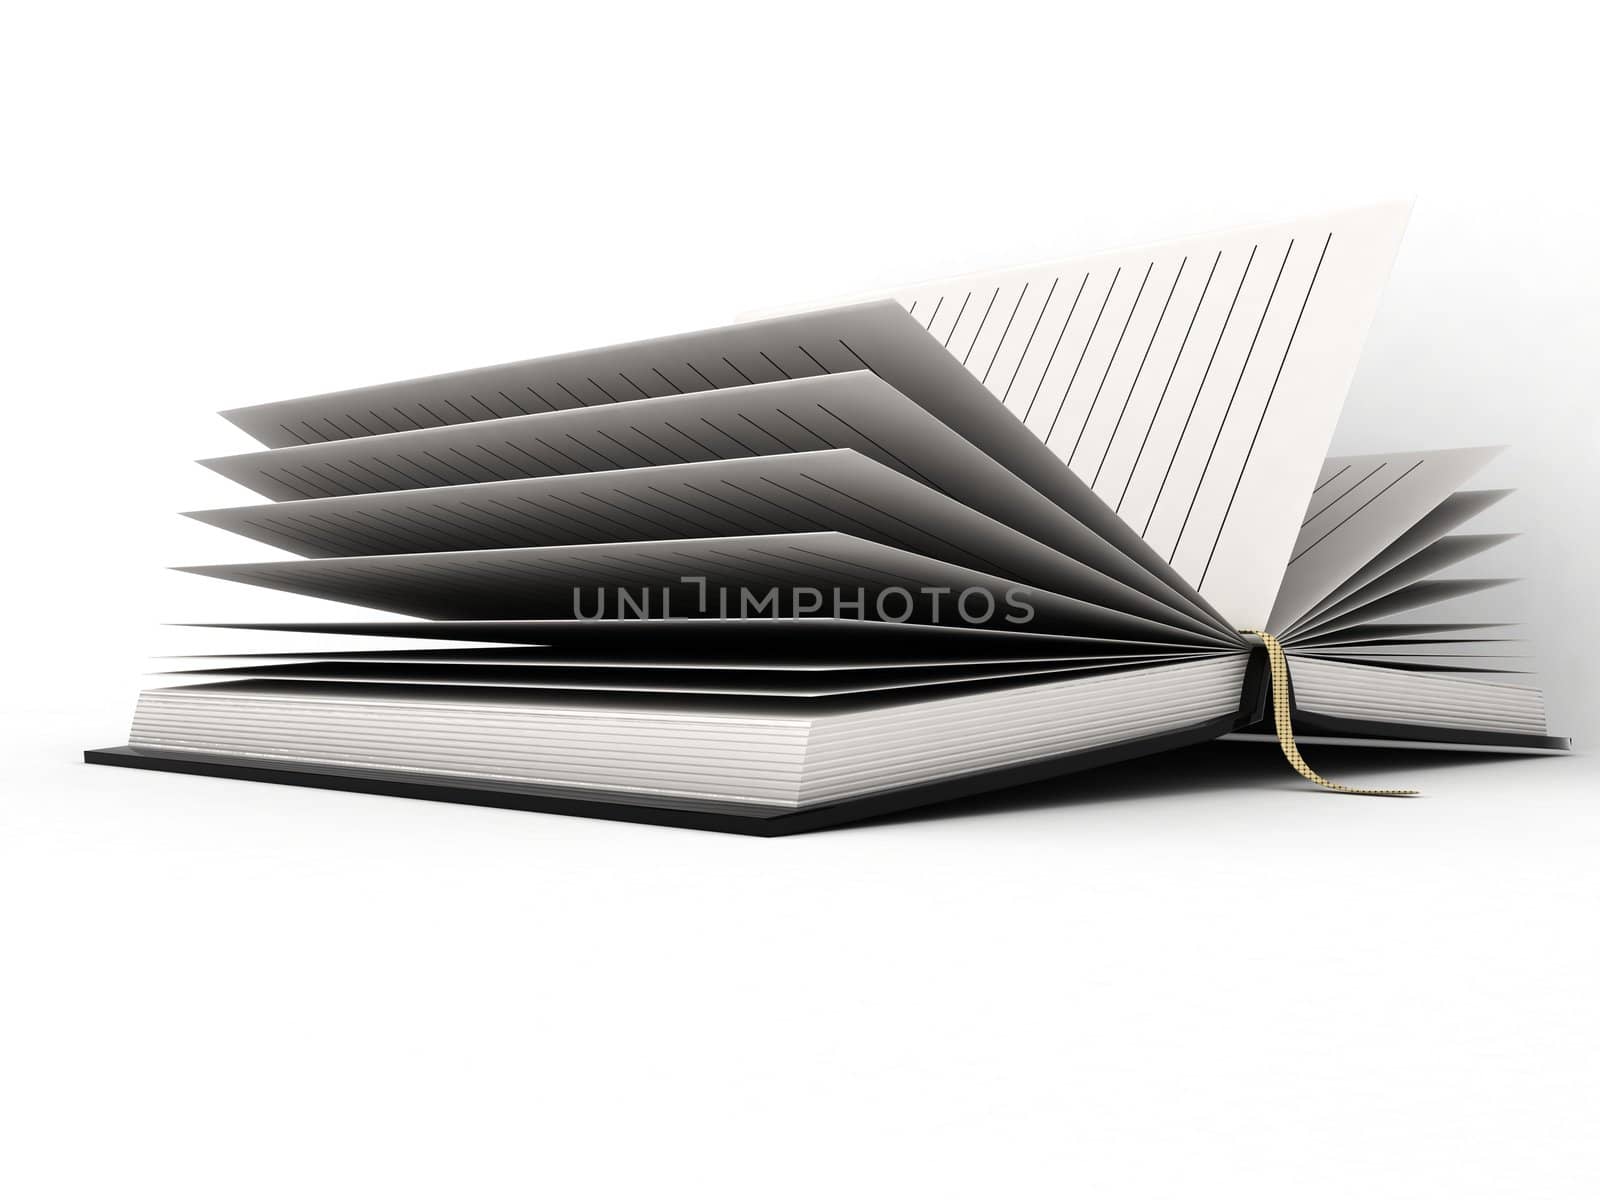 three dimensional open diary against white background

